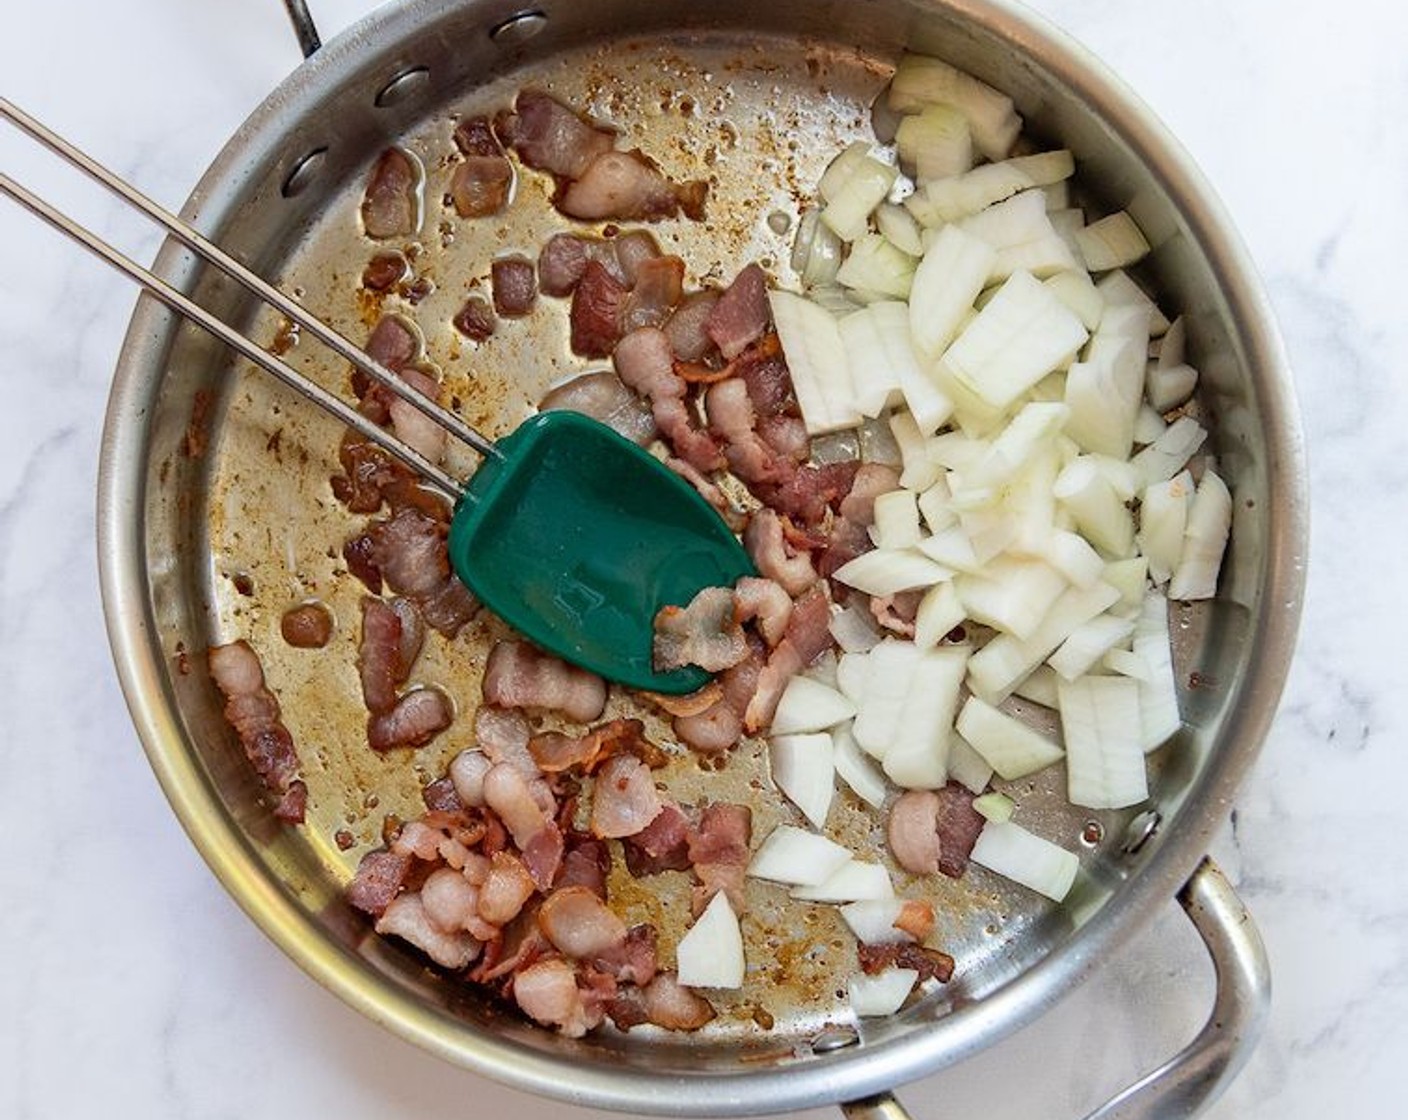 step 2 Heat a large ovenproof skillet over medium heat. Add the Bacon (4 slices) and cook about 3 minutes, or until about halfway cooked. Add Yellow Onion (1) and continue cooking until bacon is crisp and onions are soft and translucent, about 4-5 minutes longer. Add Garlic (2 cloves) and sauté 30 seconds longer.